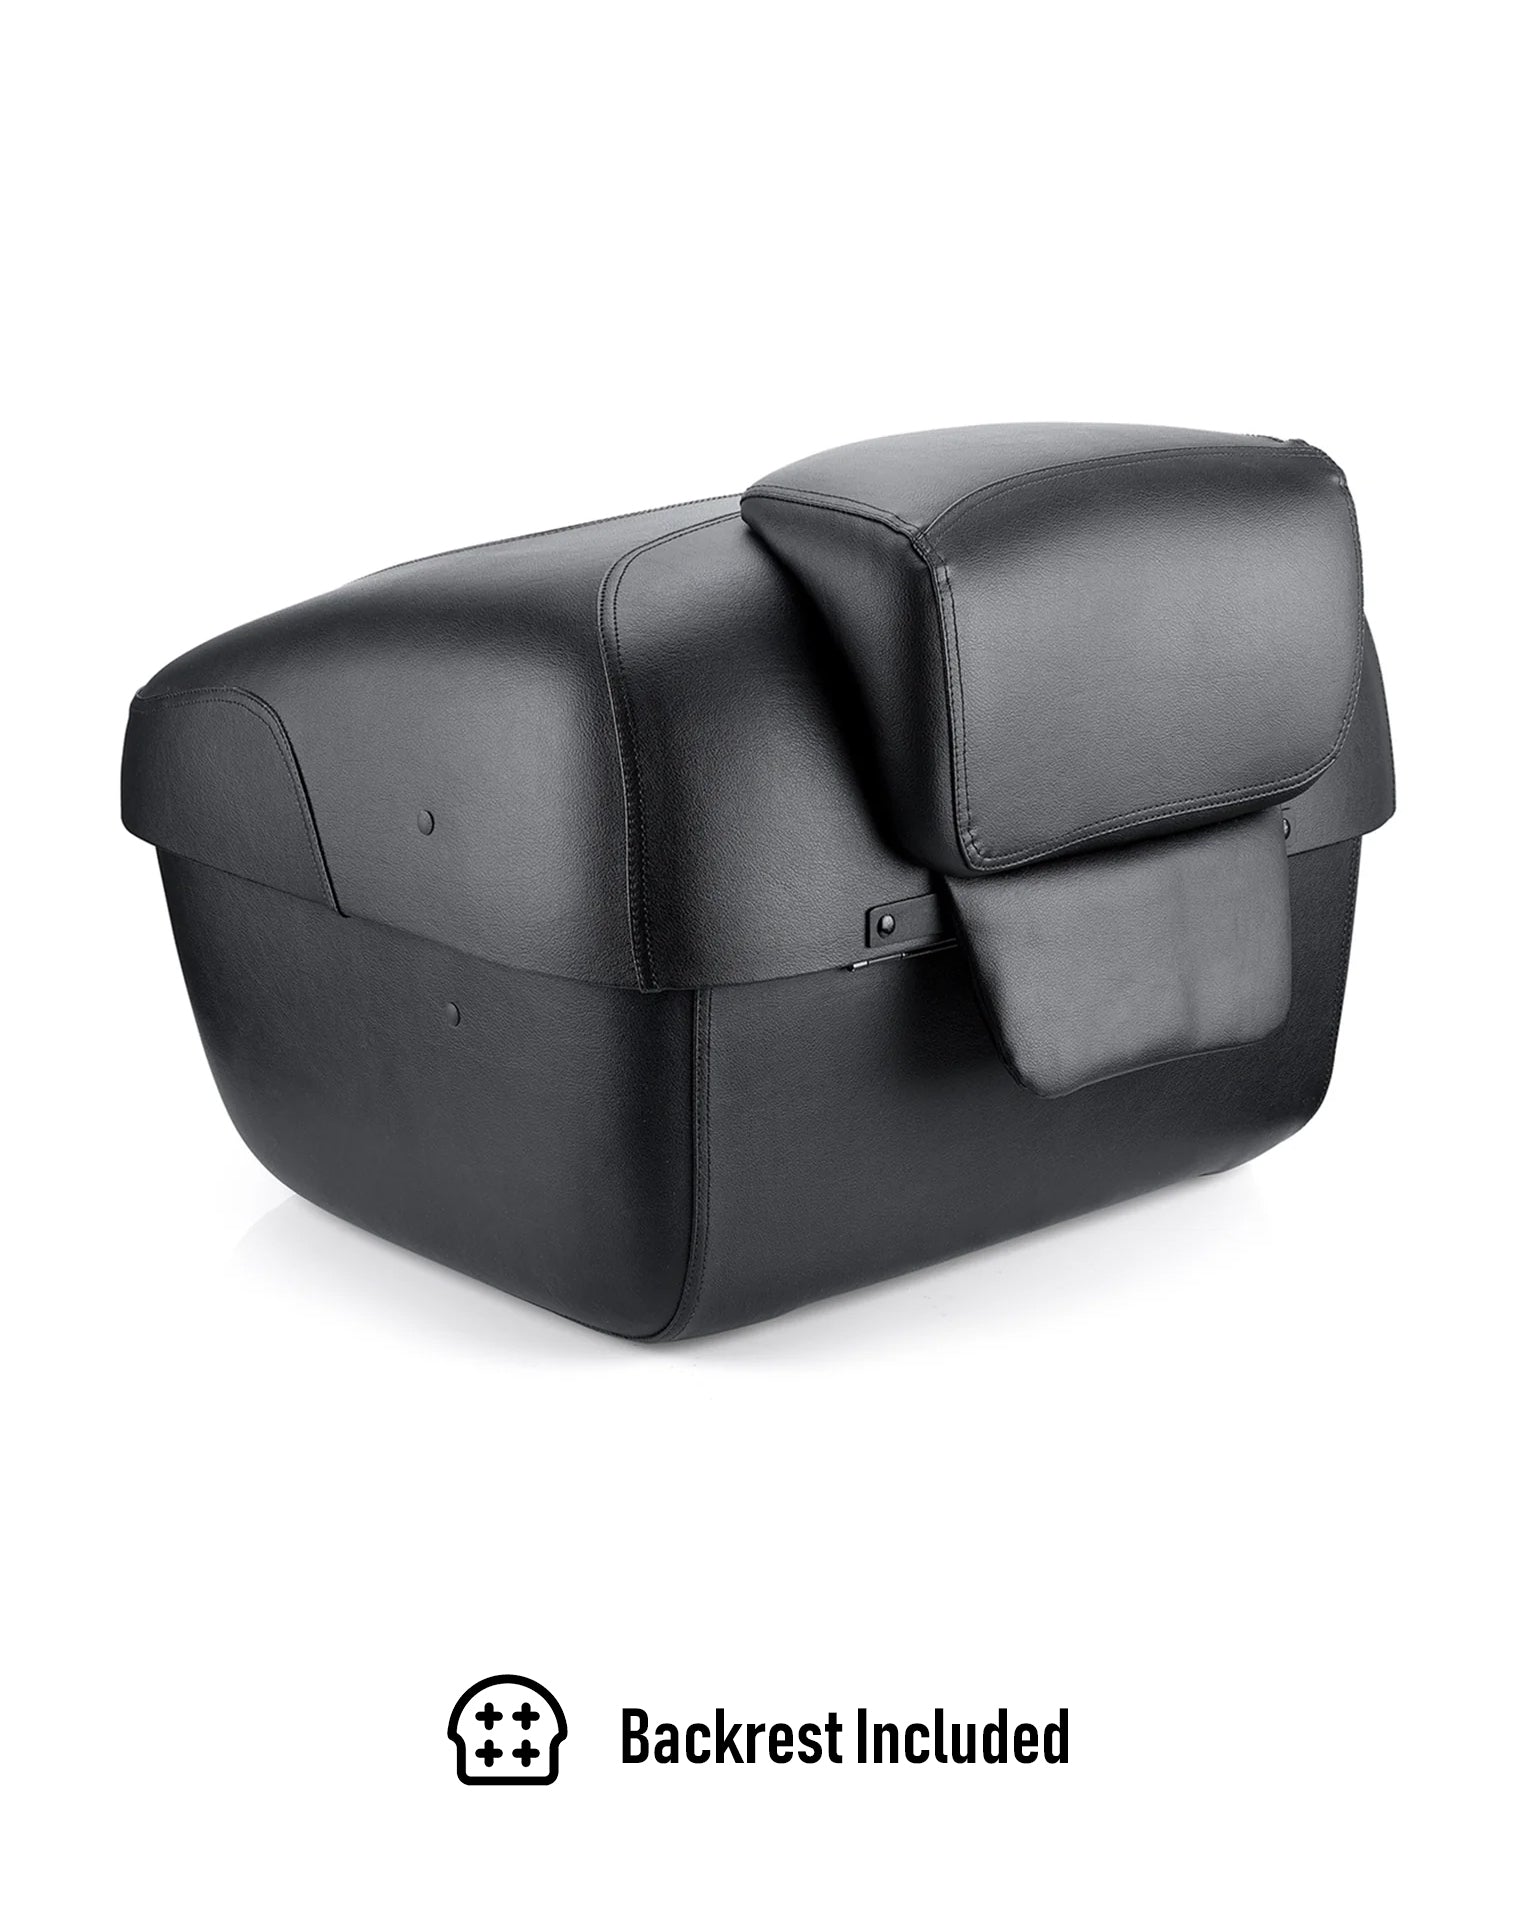 69L - Premium Extra Large Leather Wrapped Hard Motorcycle Trunk